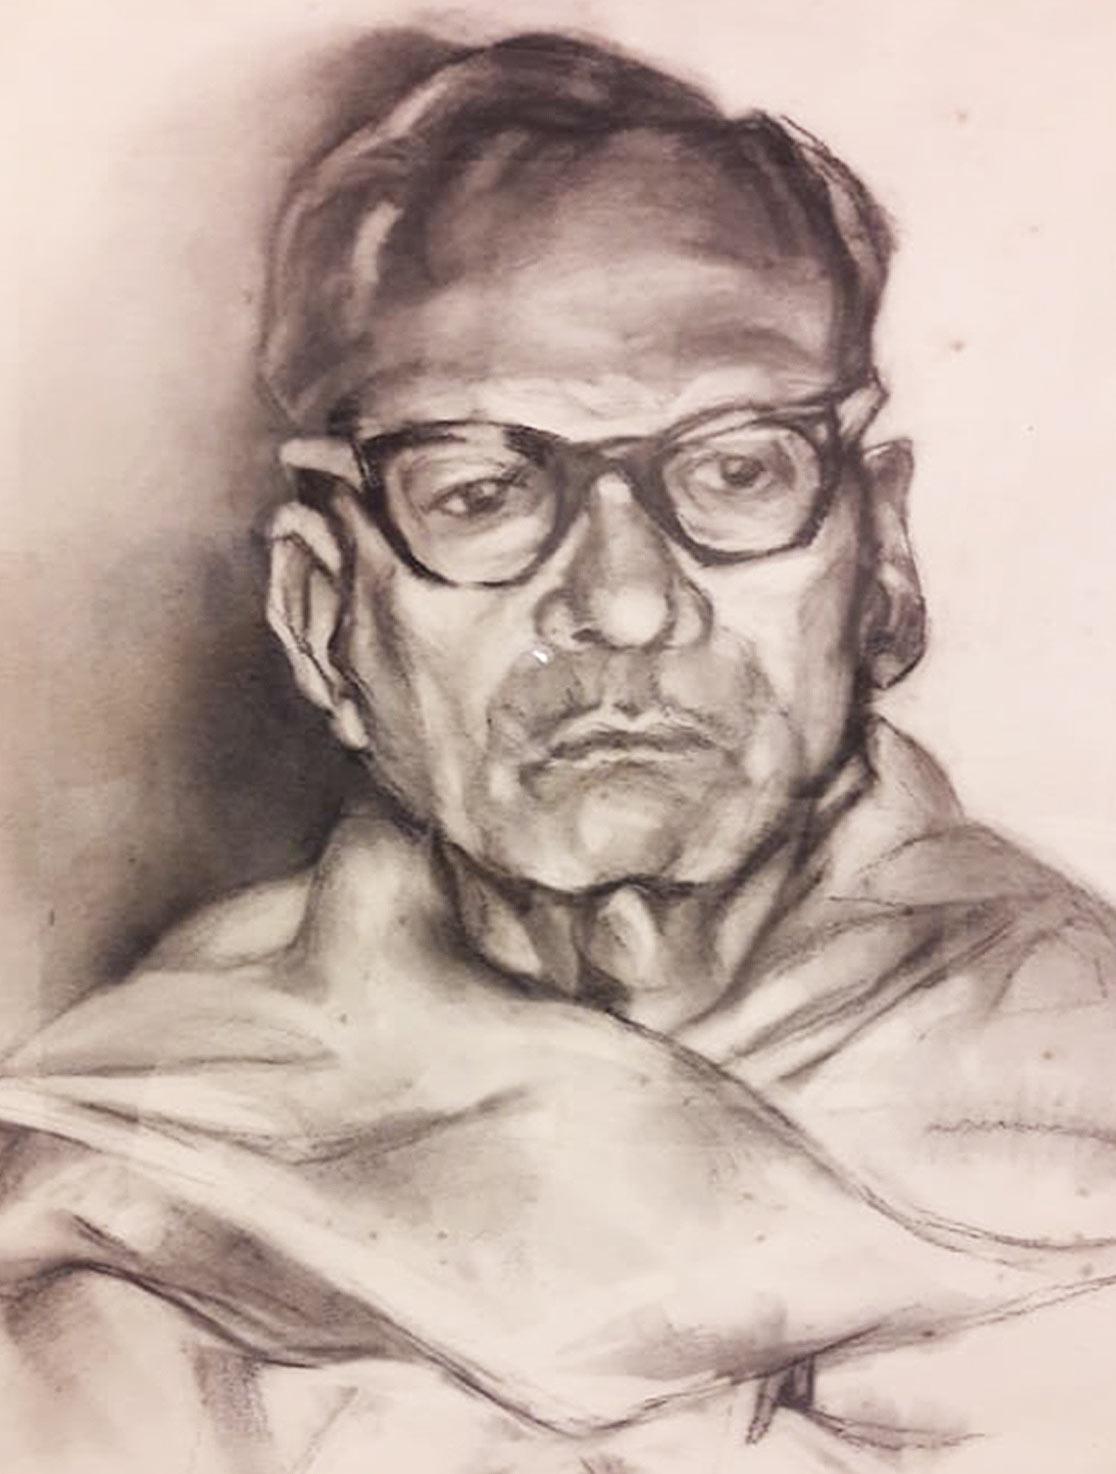 Paritosh Sen - Untitled - 30 x 22 inches (unframed size)
Charcoal on paper
Inclusive of shipment in a roll form.The work comes with a certificate signed by the artist himself.

An illustrator and a painter, Paritosh Sen is one of the most celebrated